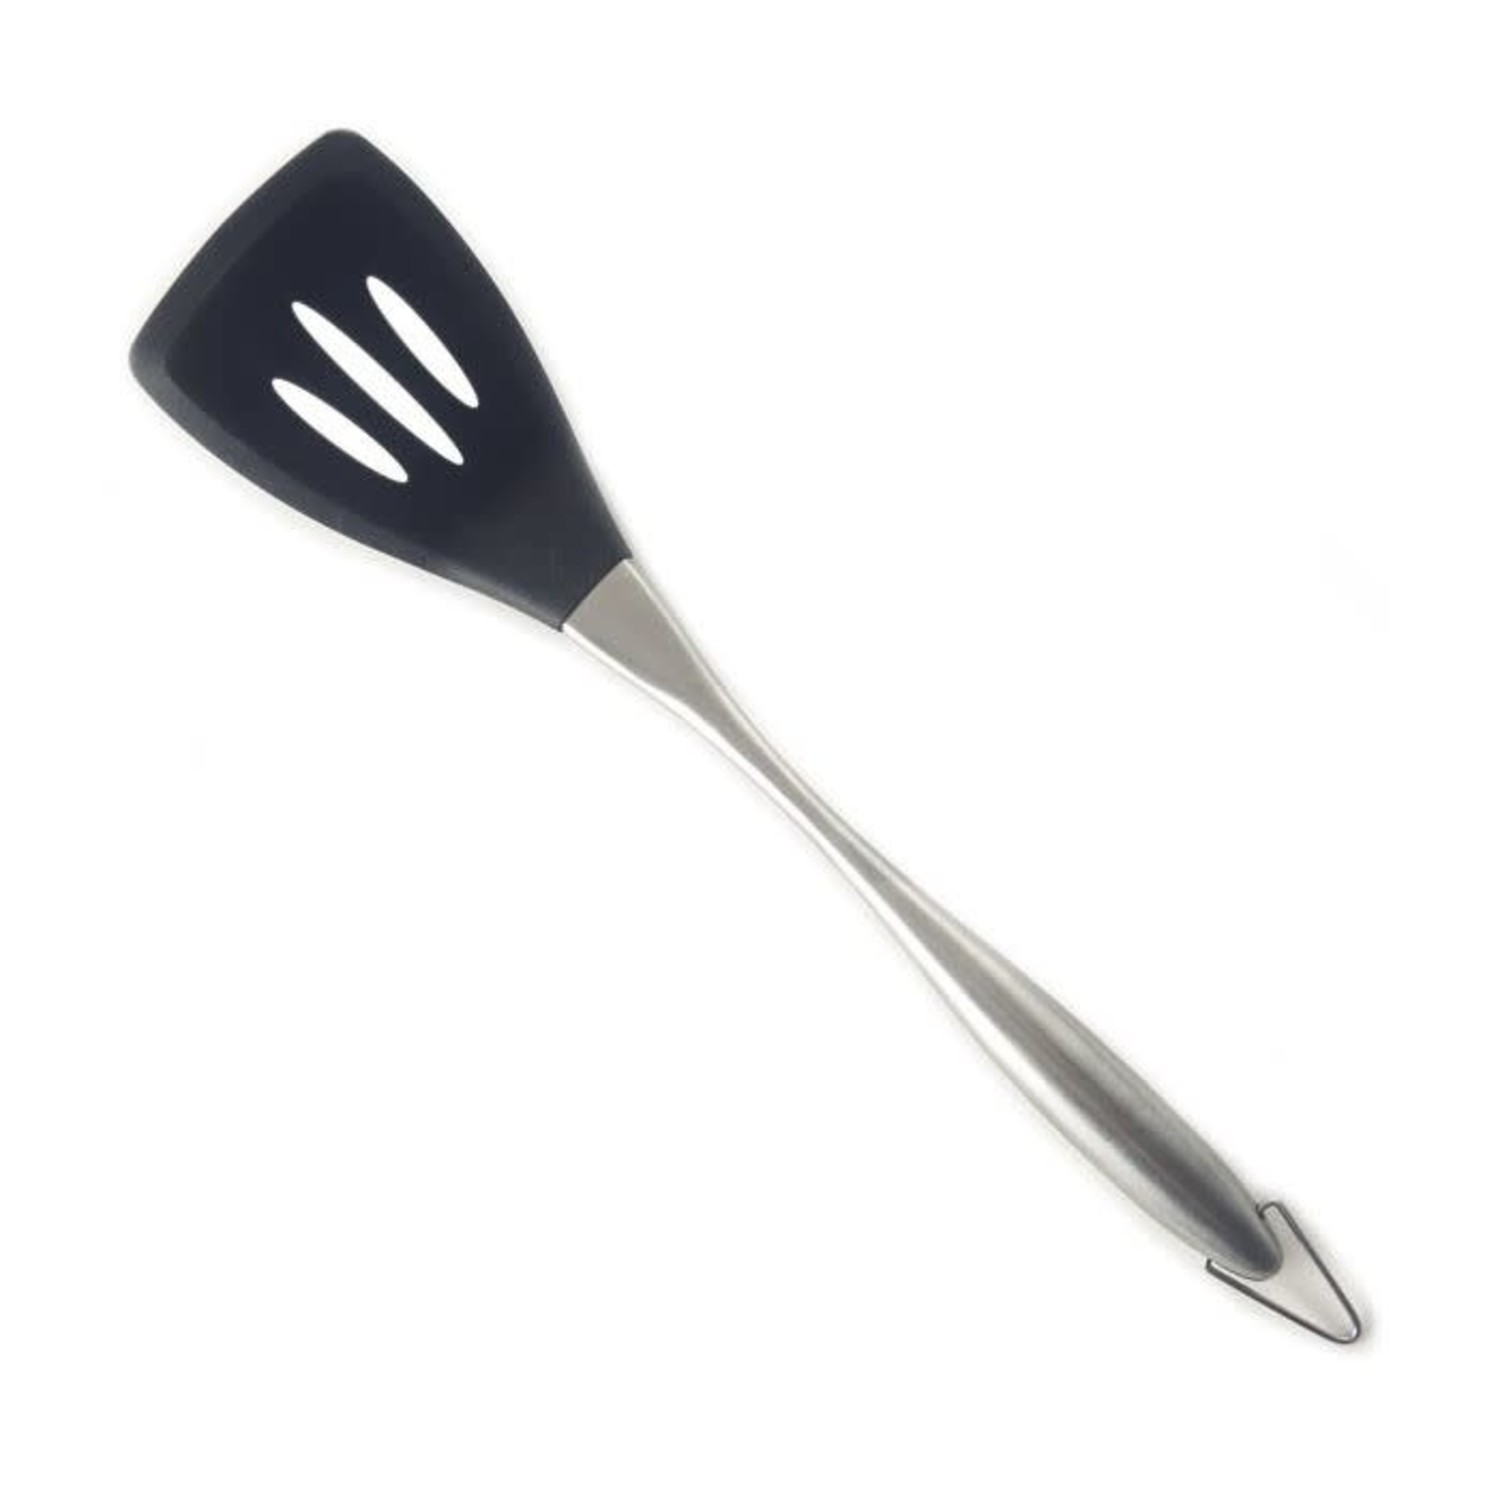 https://cdn.shoplightspeed.com/shops/633447/files/45022780/1500x4000x3/silicone-offset-slotted-turner-spatula-with-stainl.jpg